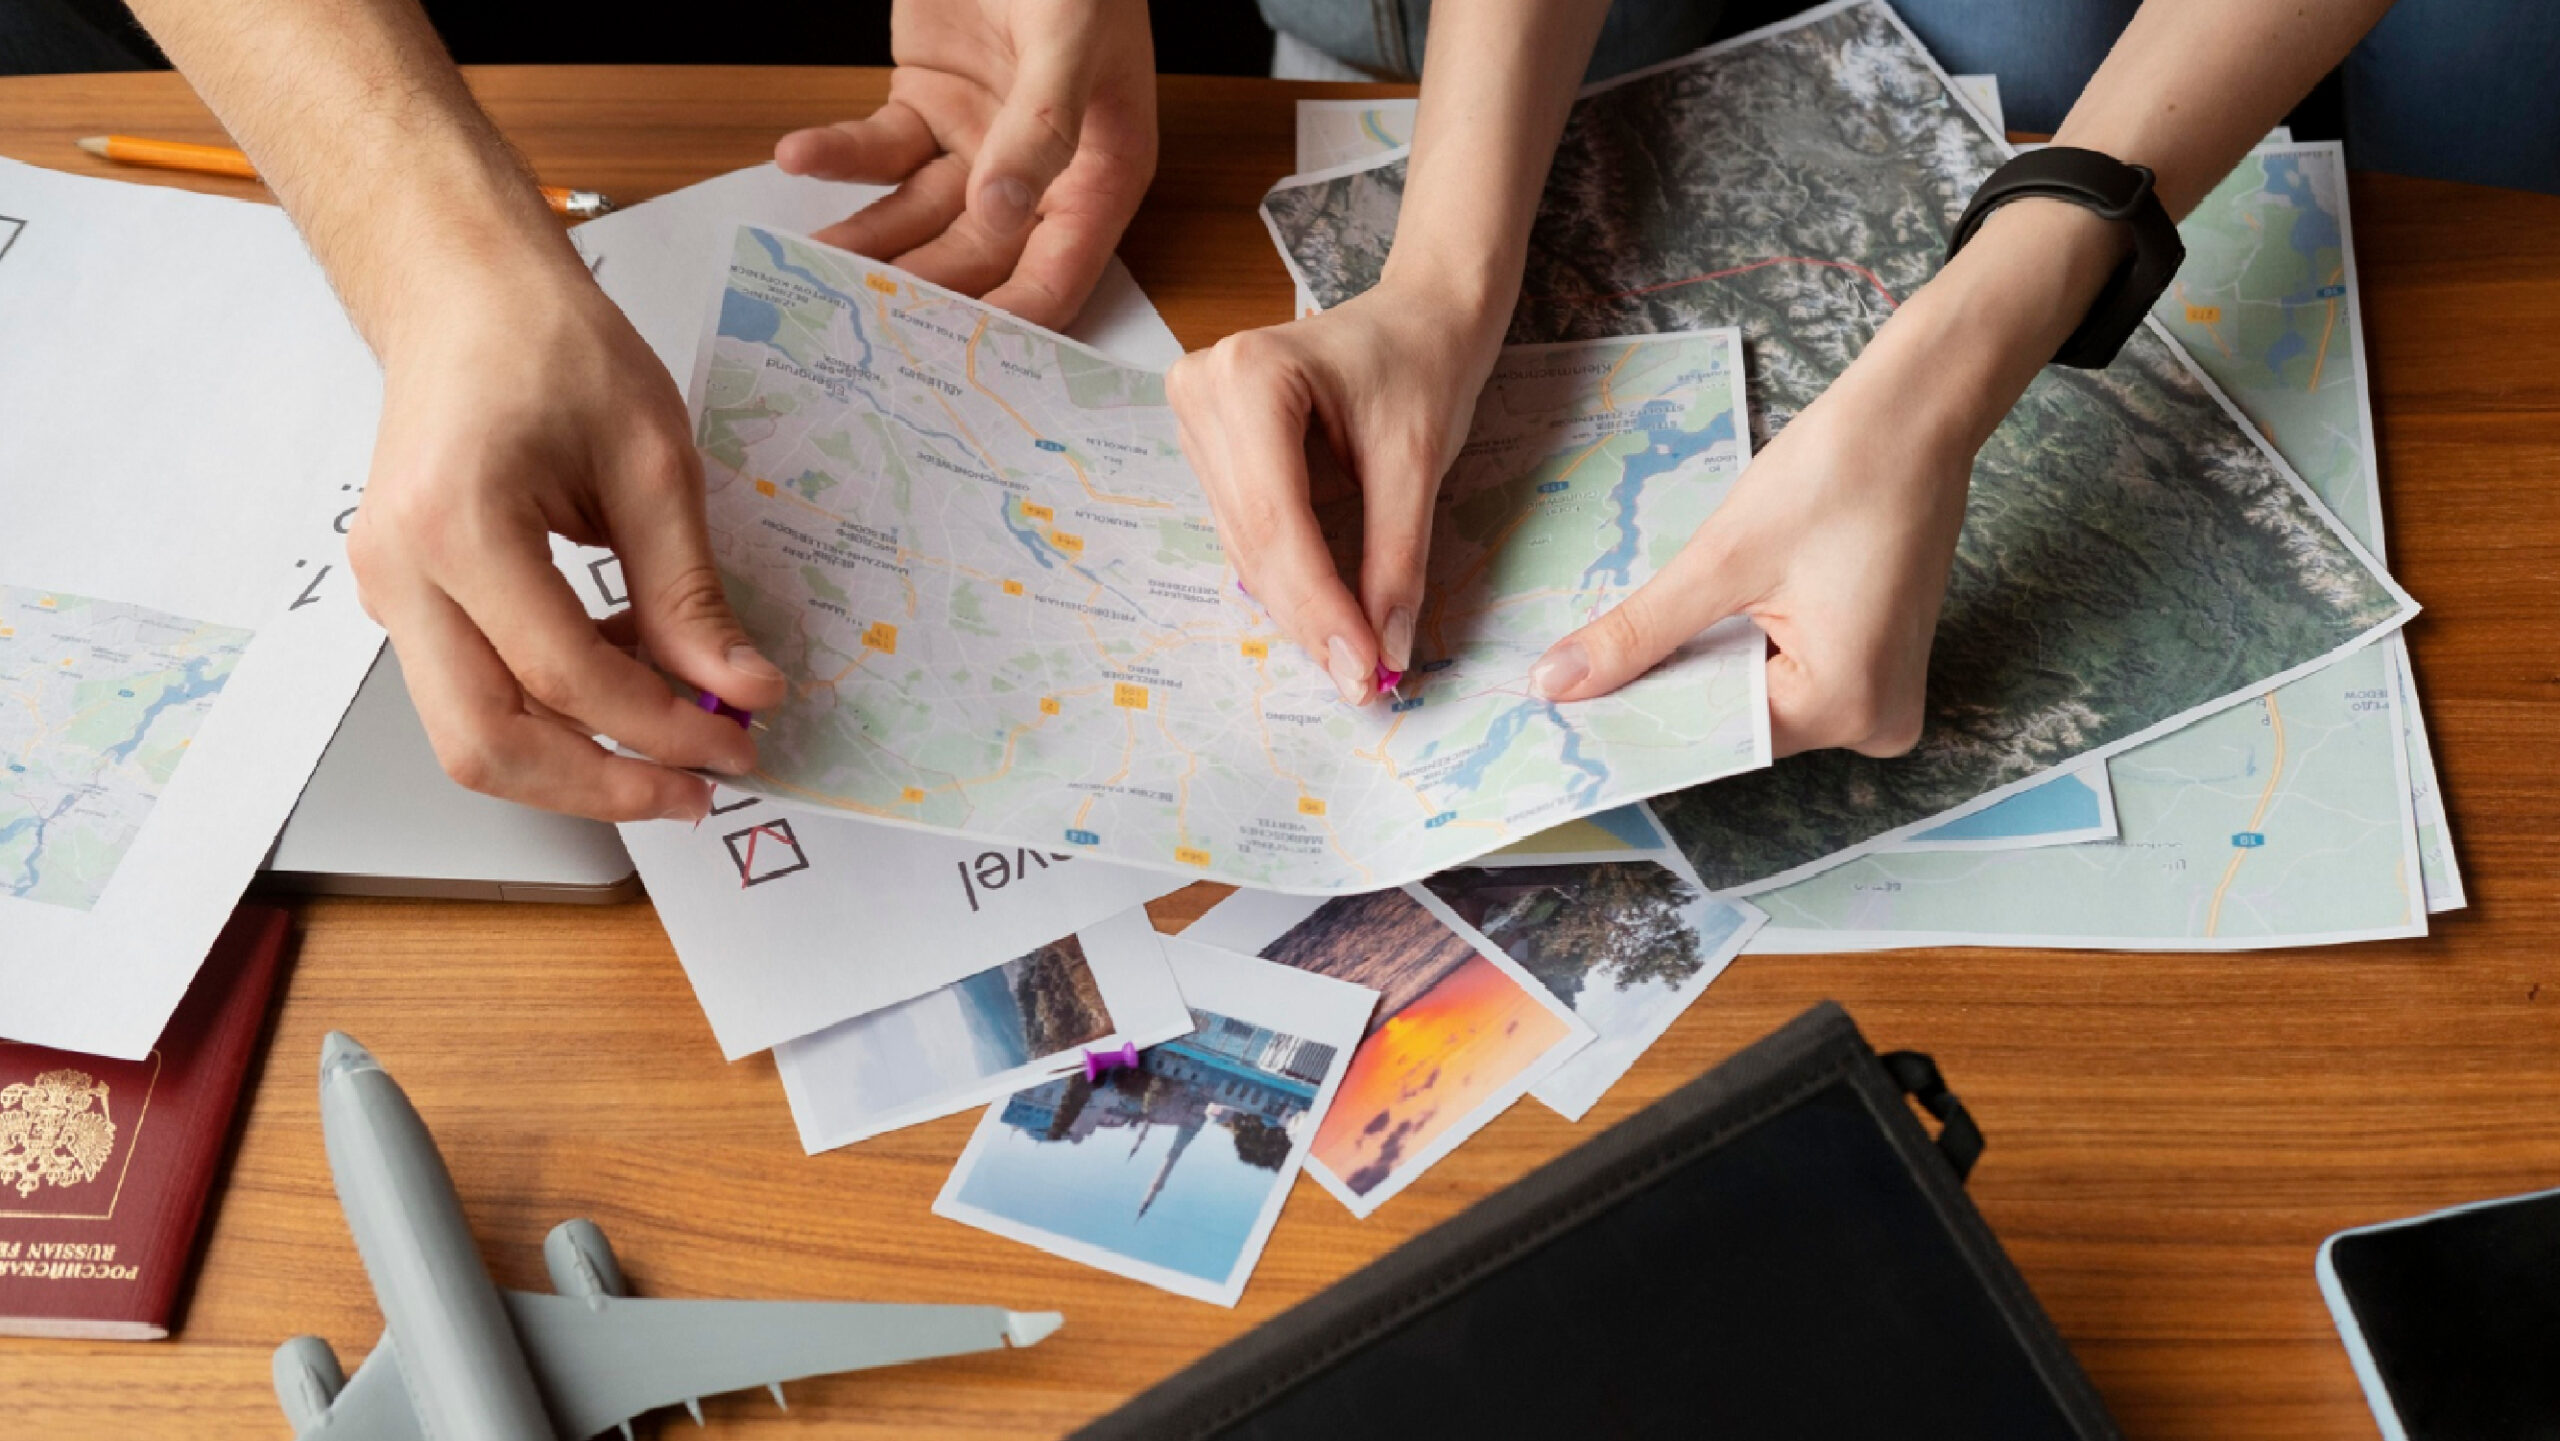 Hands planning a trip with maps and travel photos, highlighting the digital nomad lifestyle.